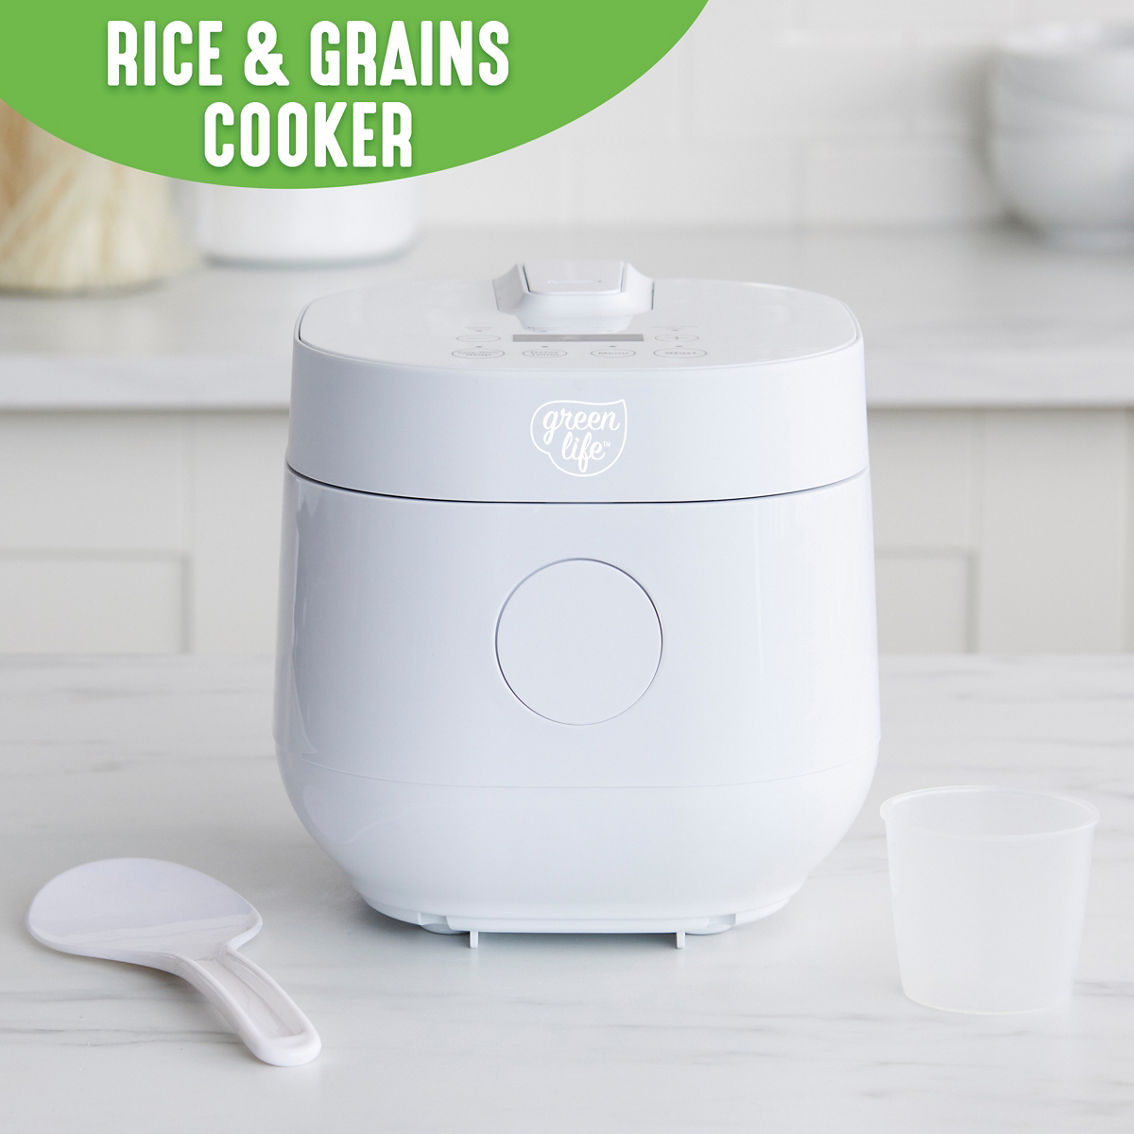 GreenLife Go Grains Rice and Grains Cooker - Image 2 of 6